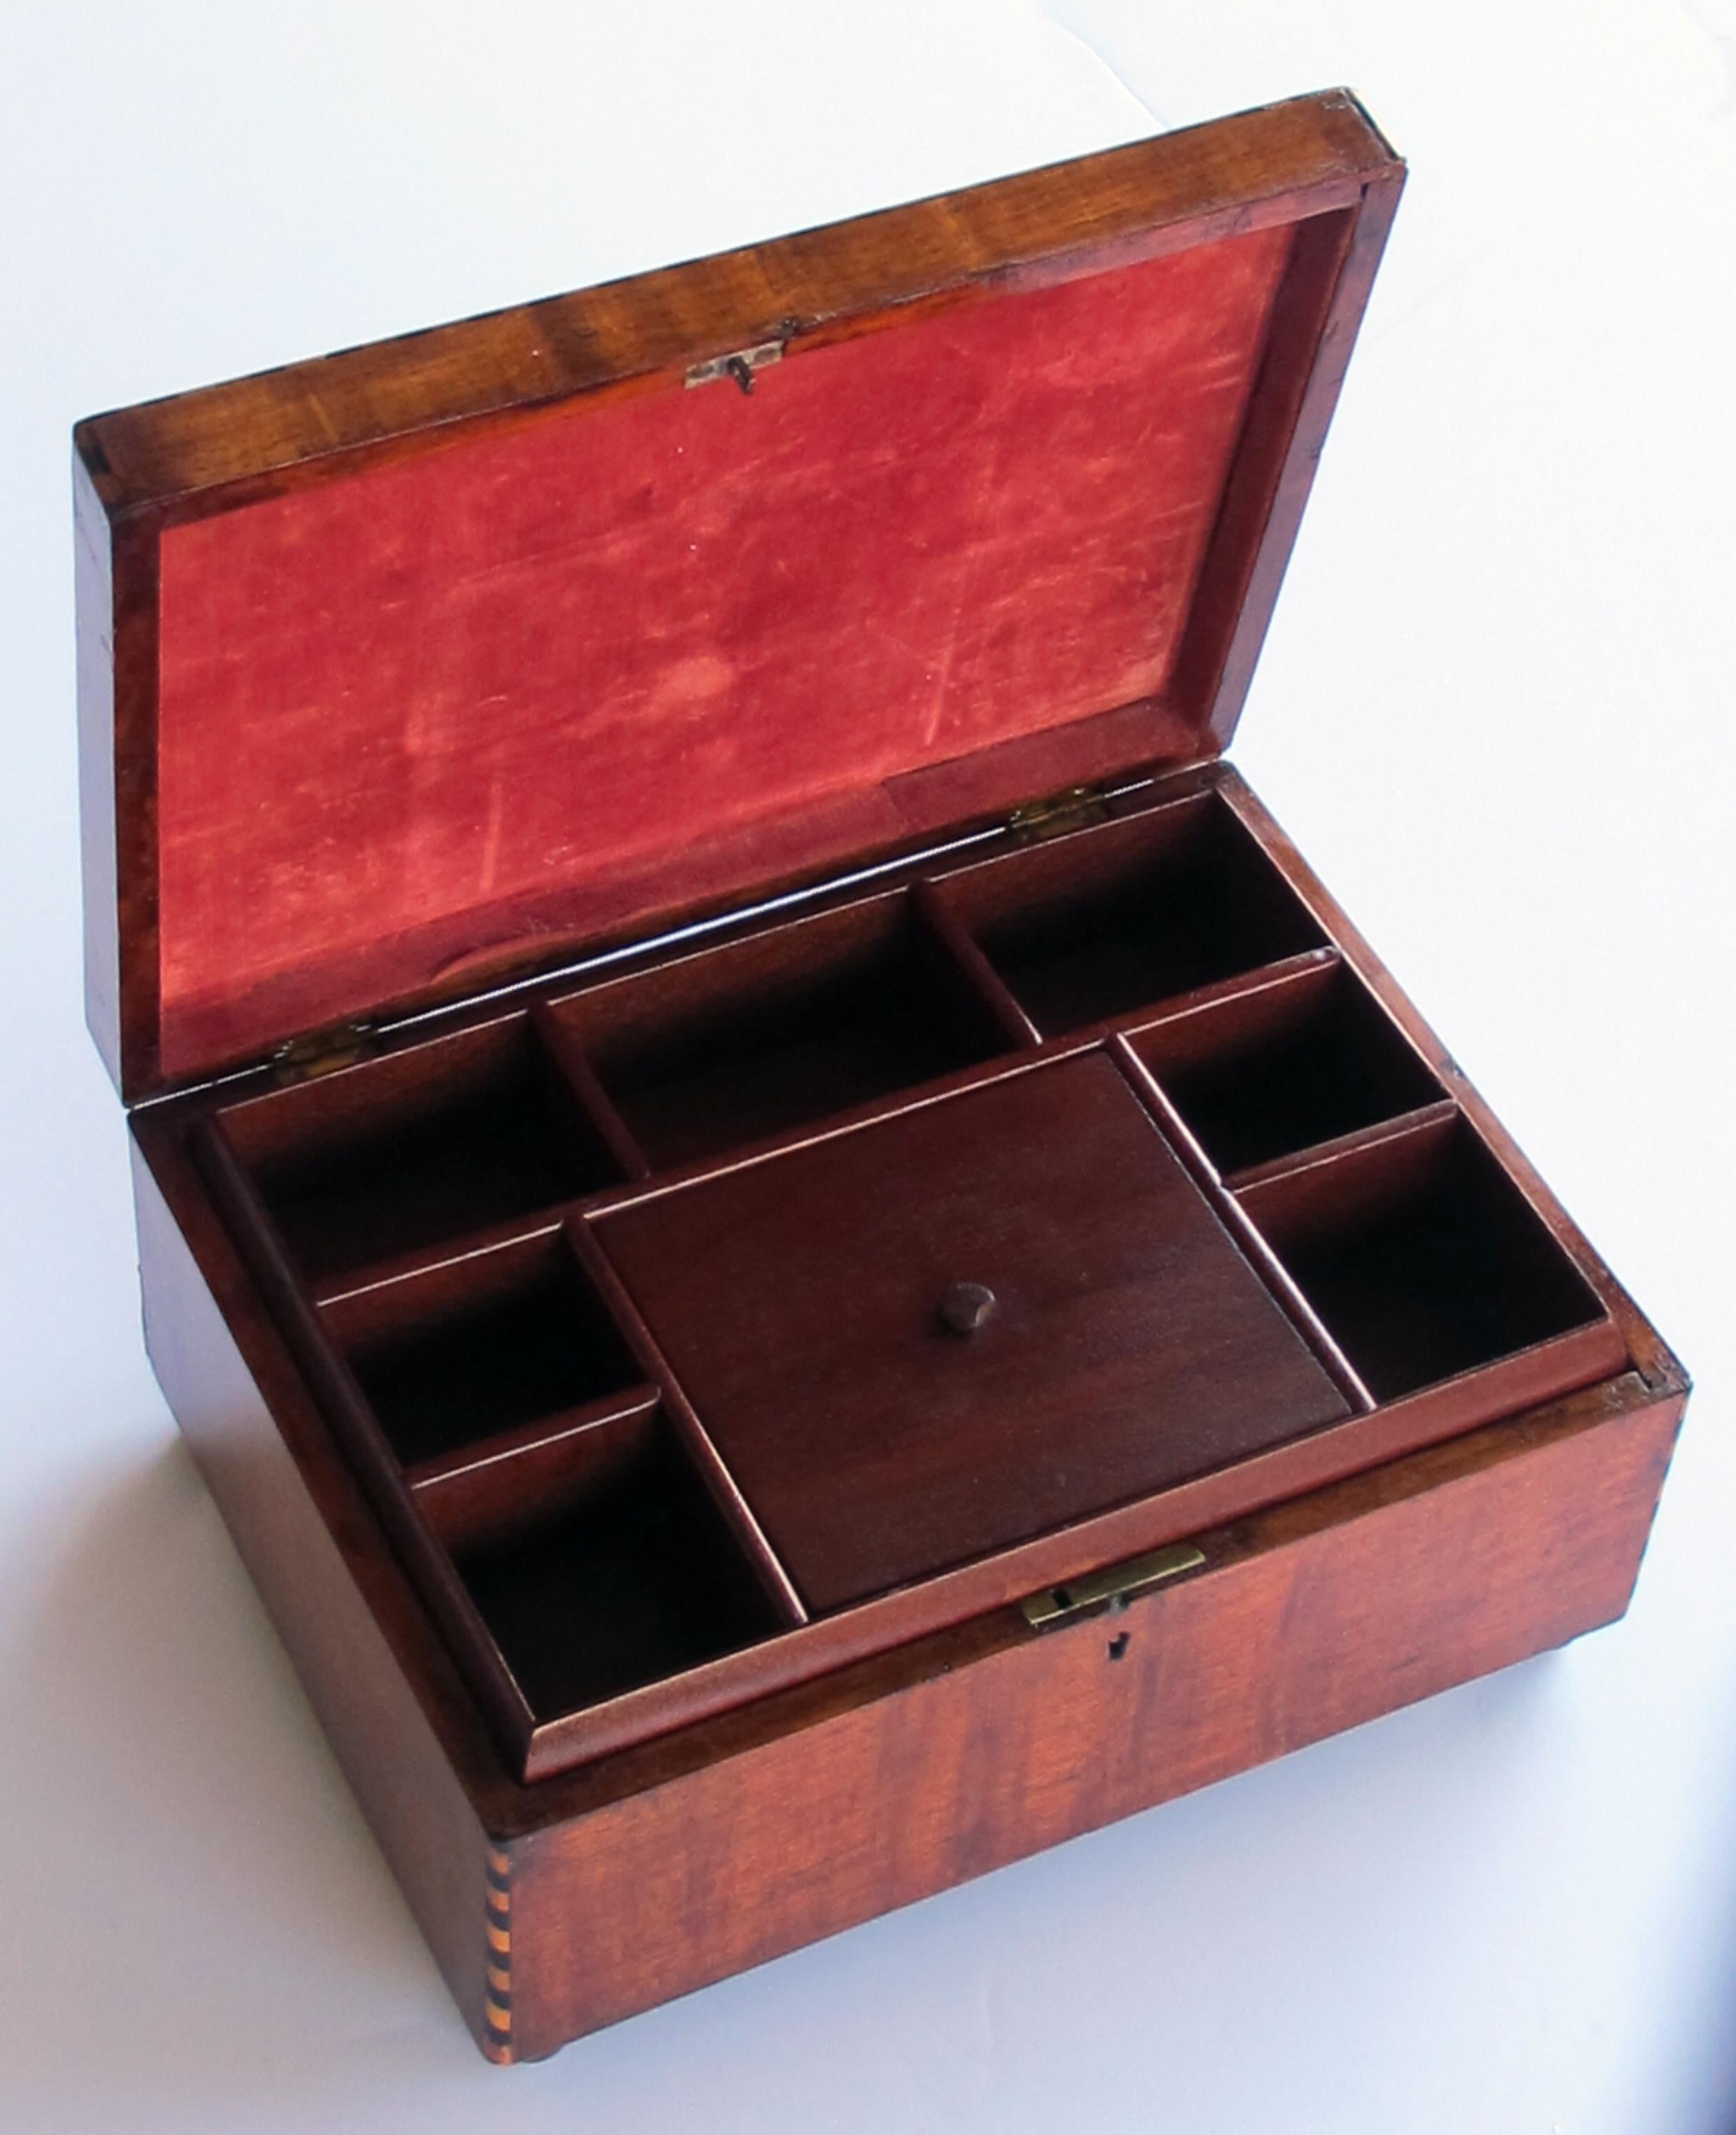 A handsome and warmly-patinated English William IV mahogany dressing box with tumbling block inlay; perfect for jewelry or men's accessories this rectangular box with intricate 'tumbling block' inlay on the lid; with alternating walnut and ebony